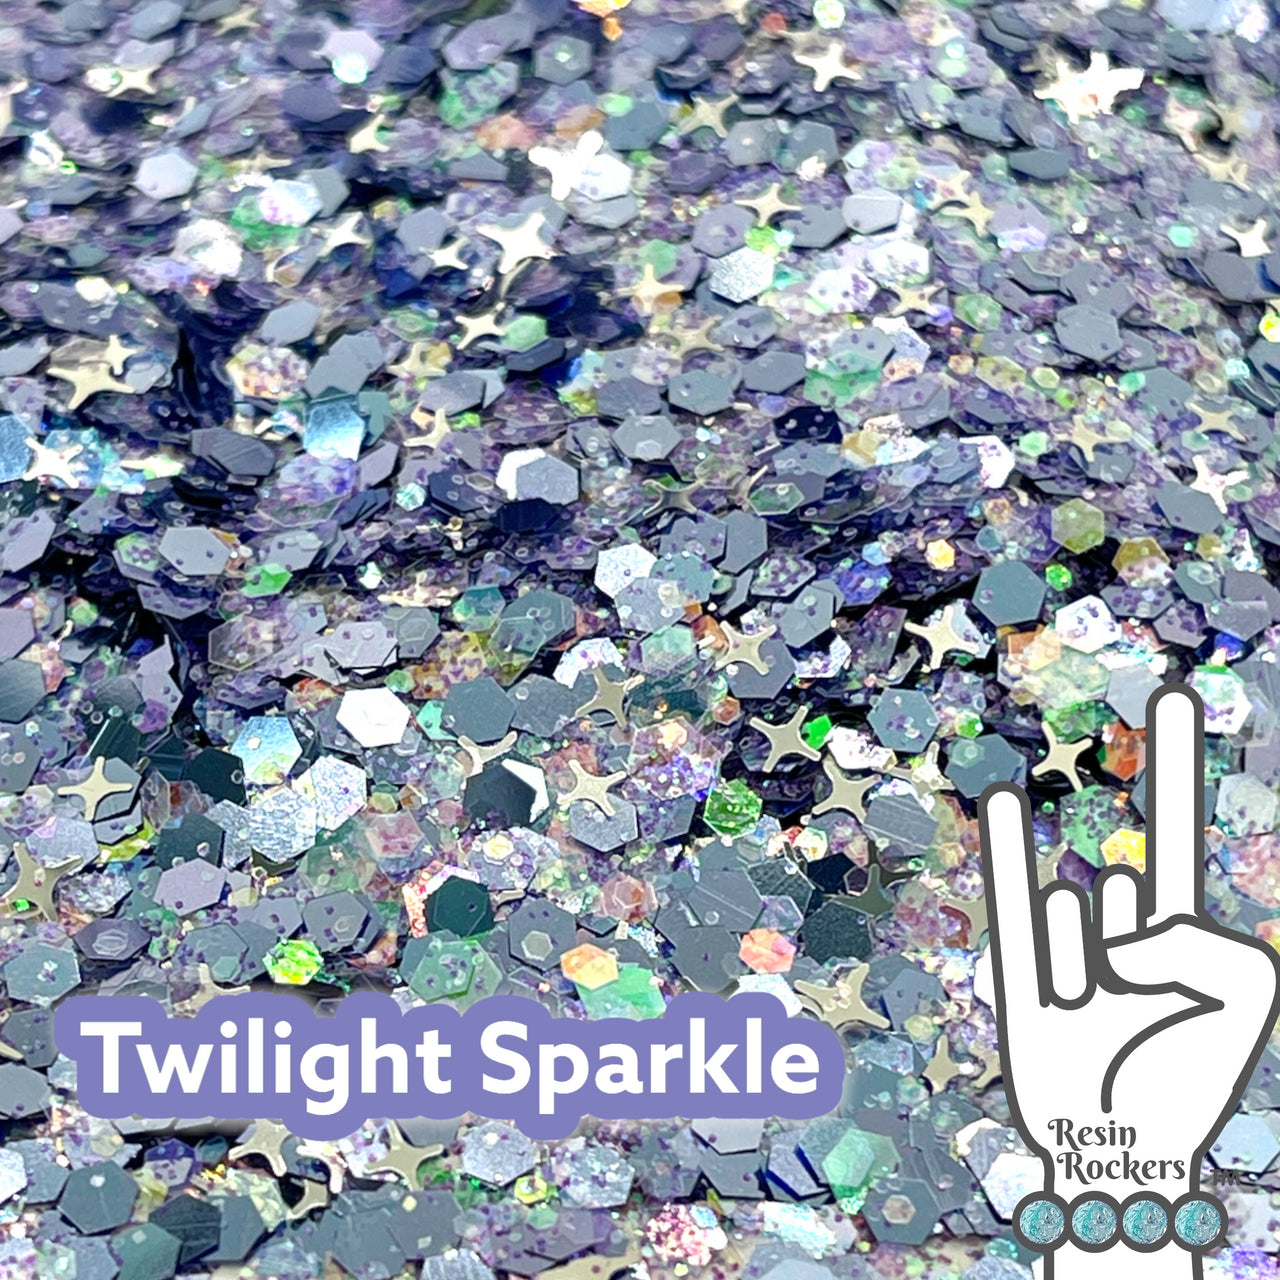 Twilight Sparkle Premium Pixie for Poxy Limited Edition Chunky Glitter Mix